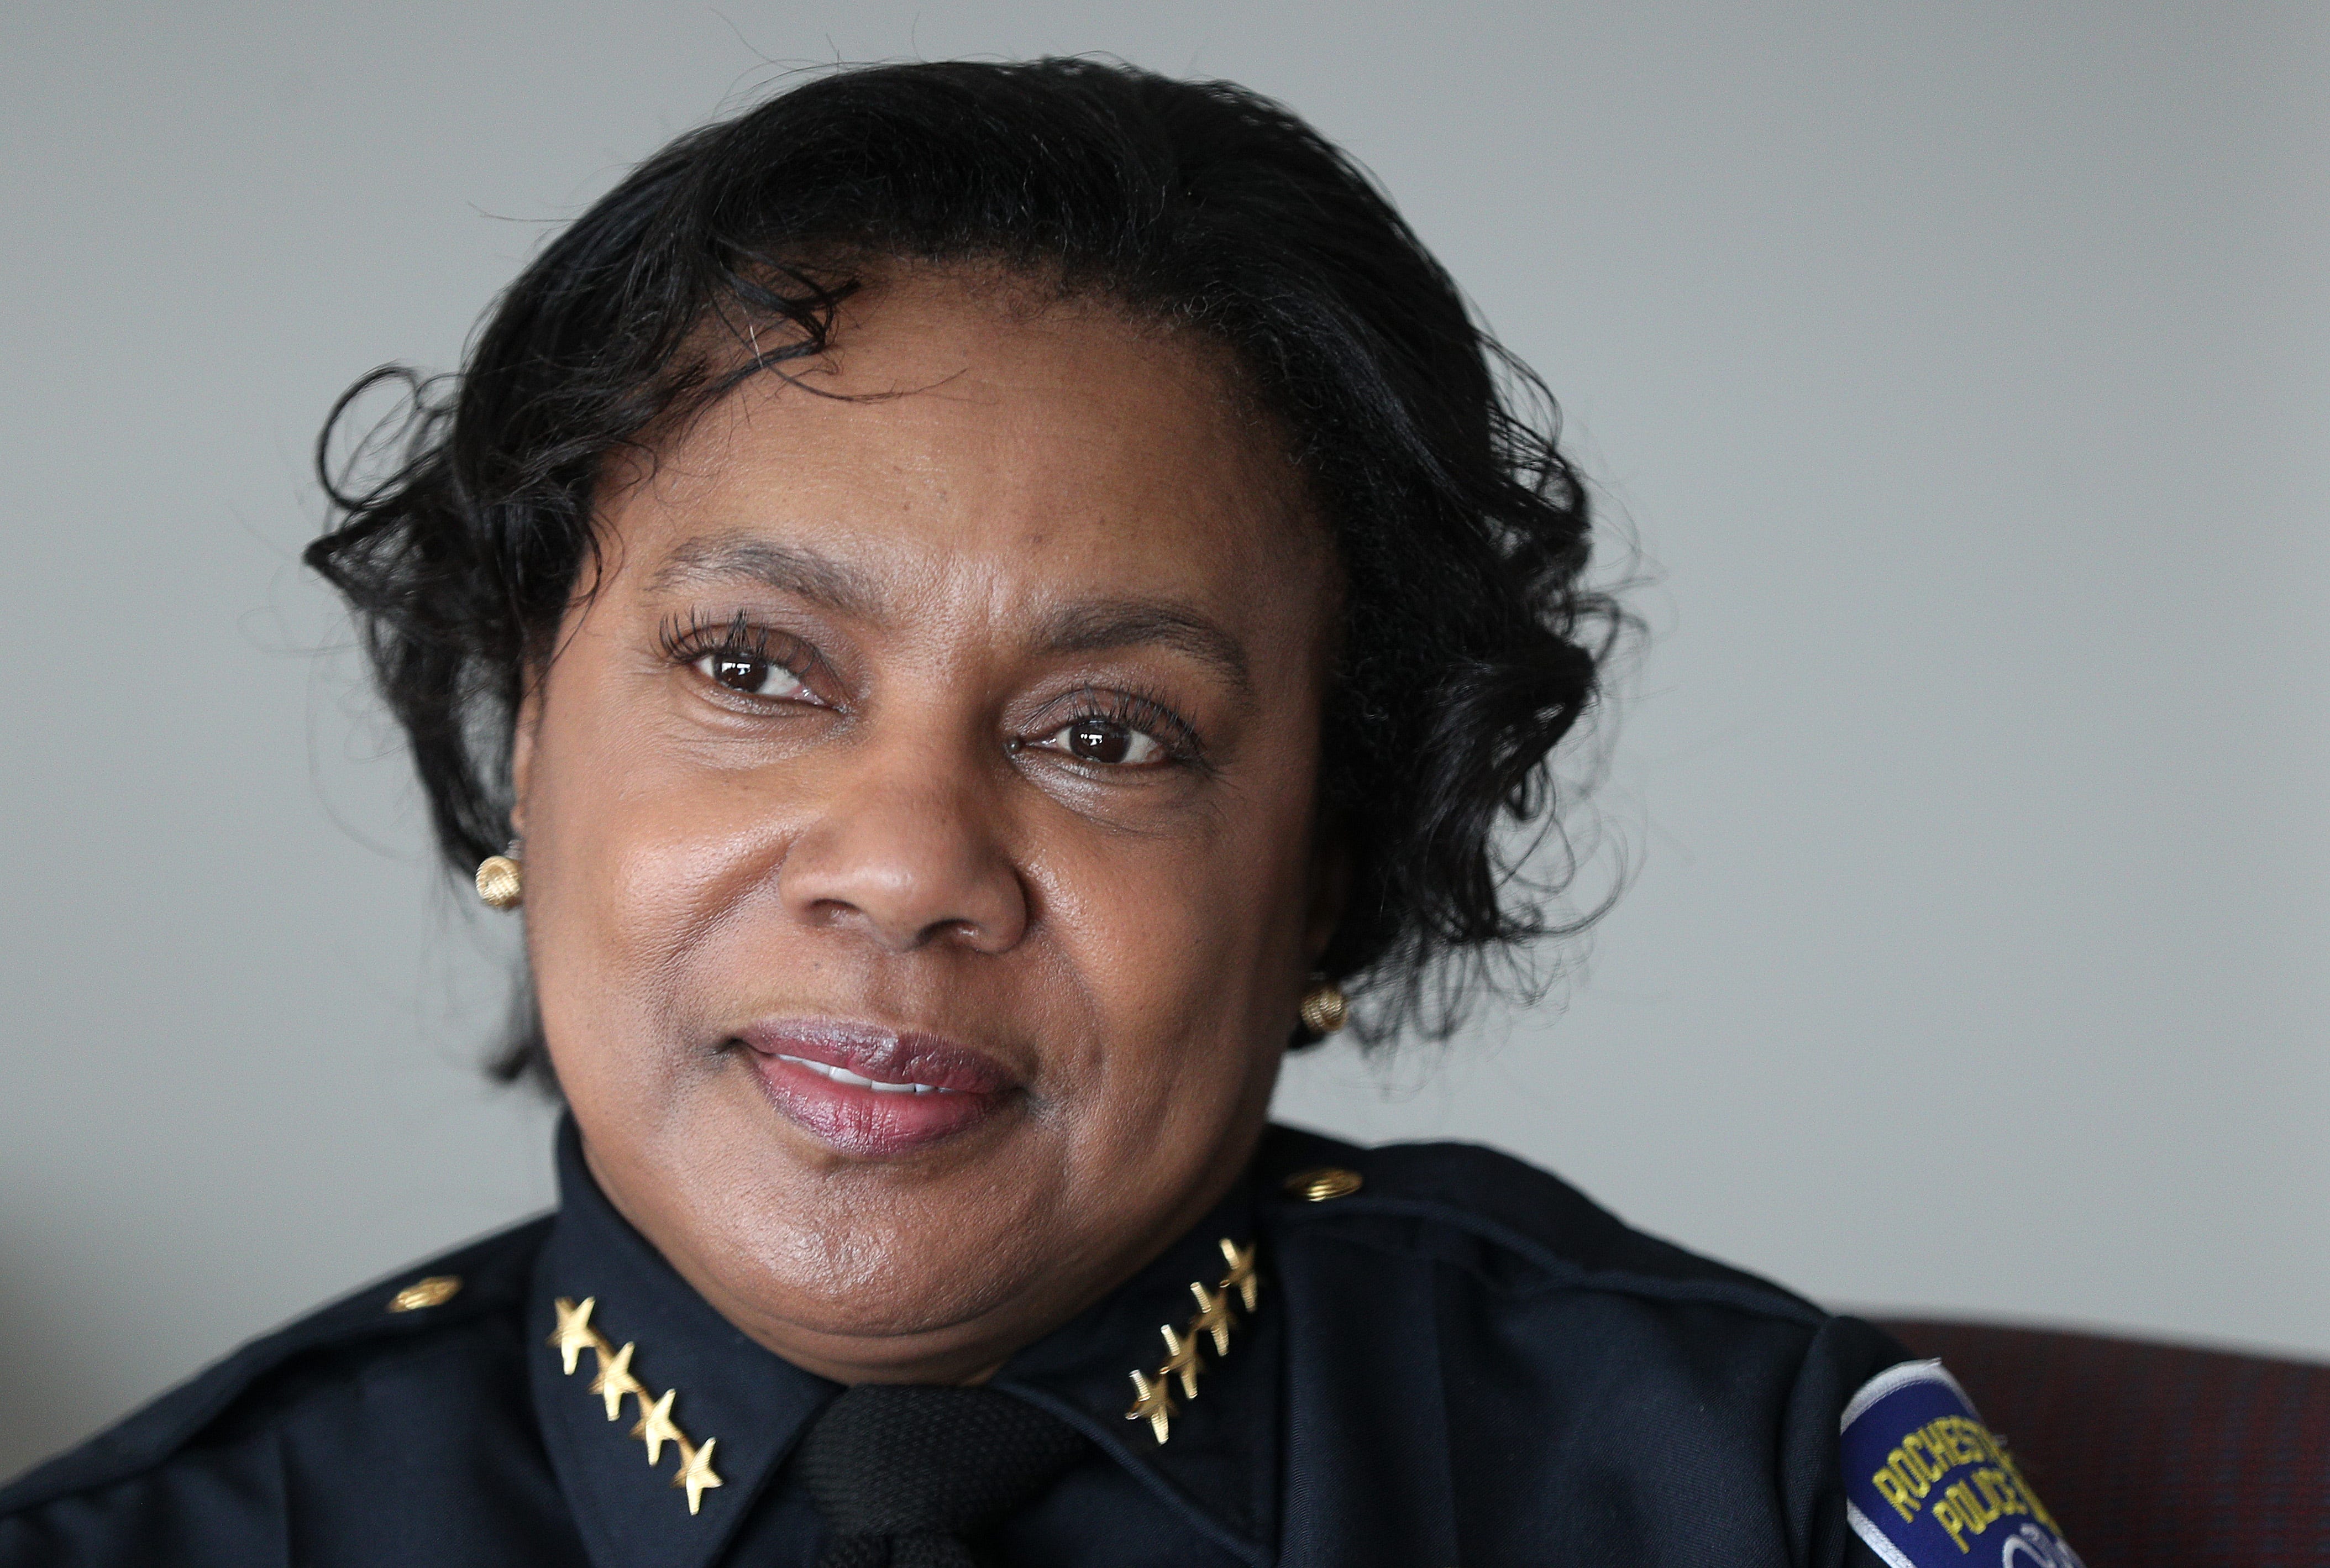 Cynthia Herriott-Sullivan is the first woman to lead the Rochester Police Department.